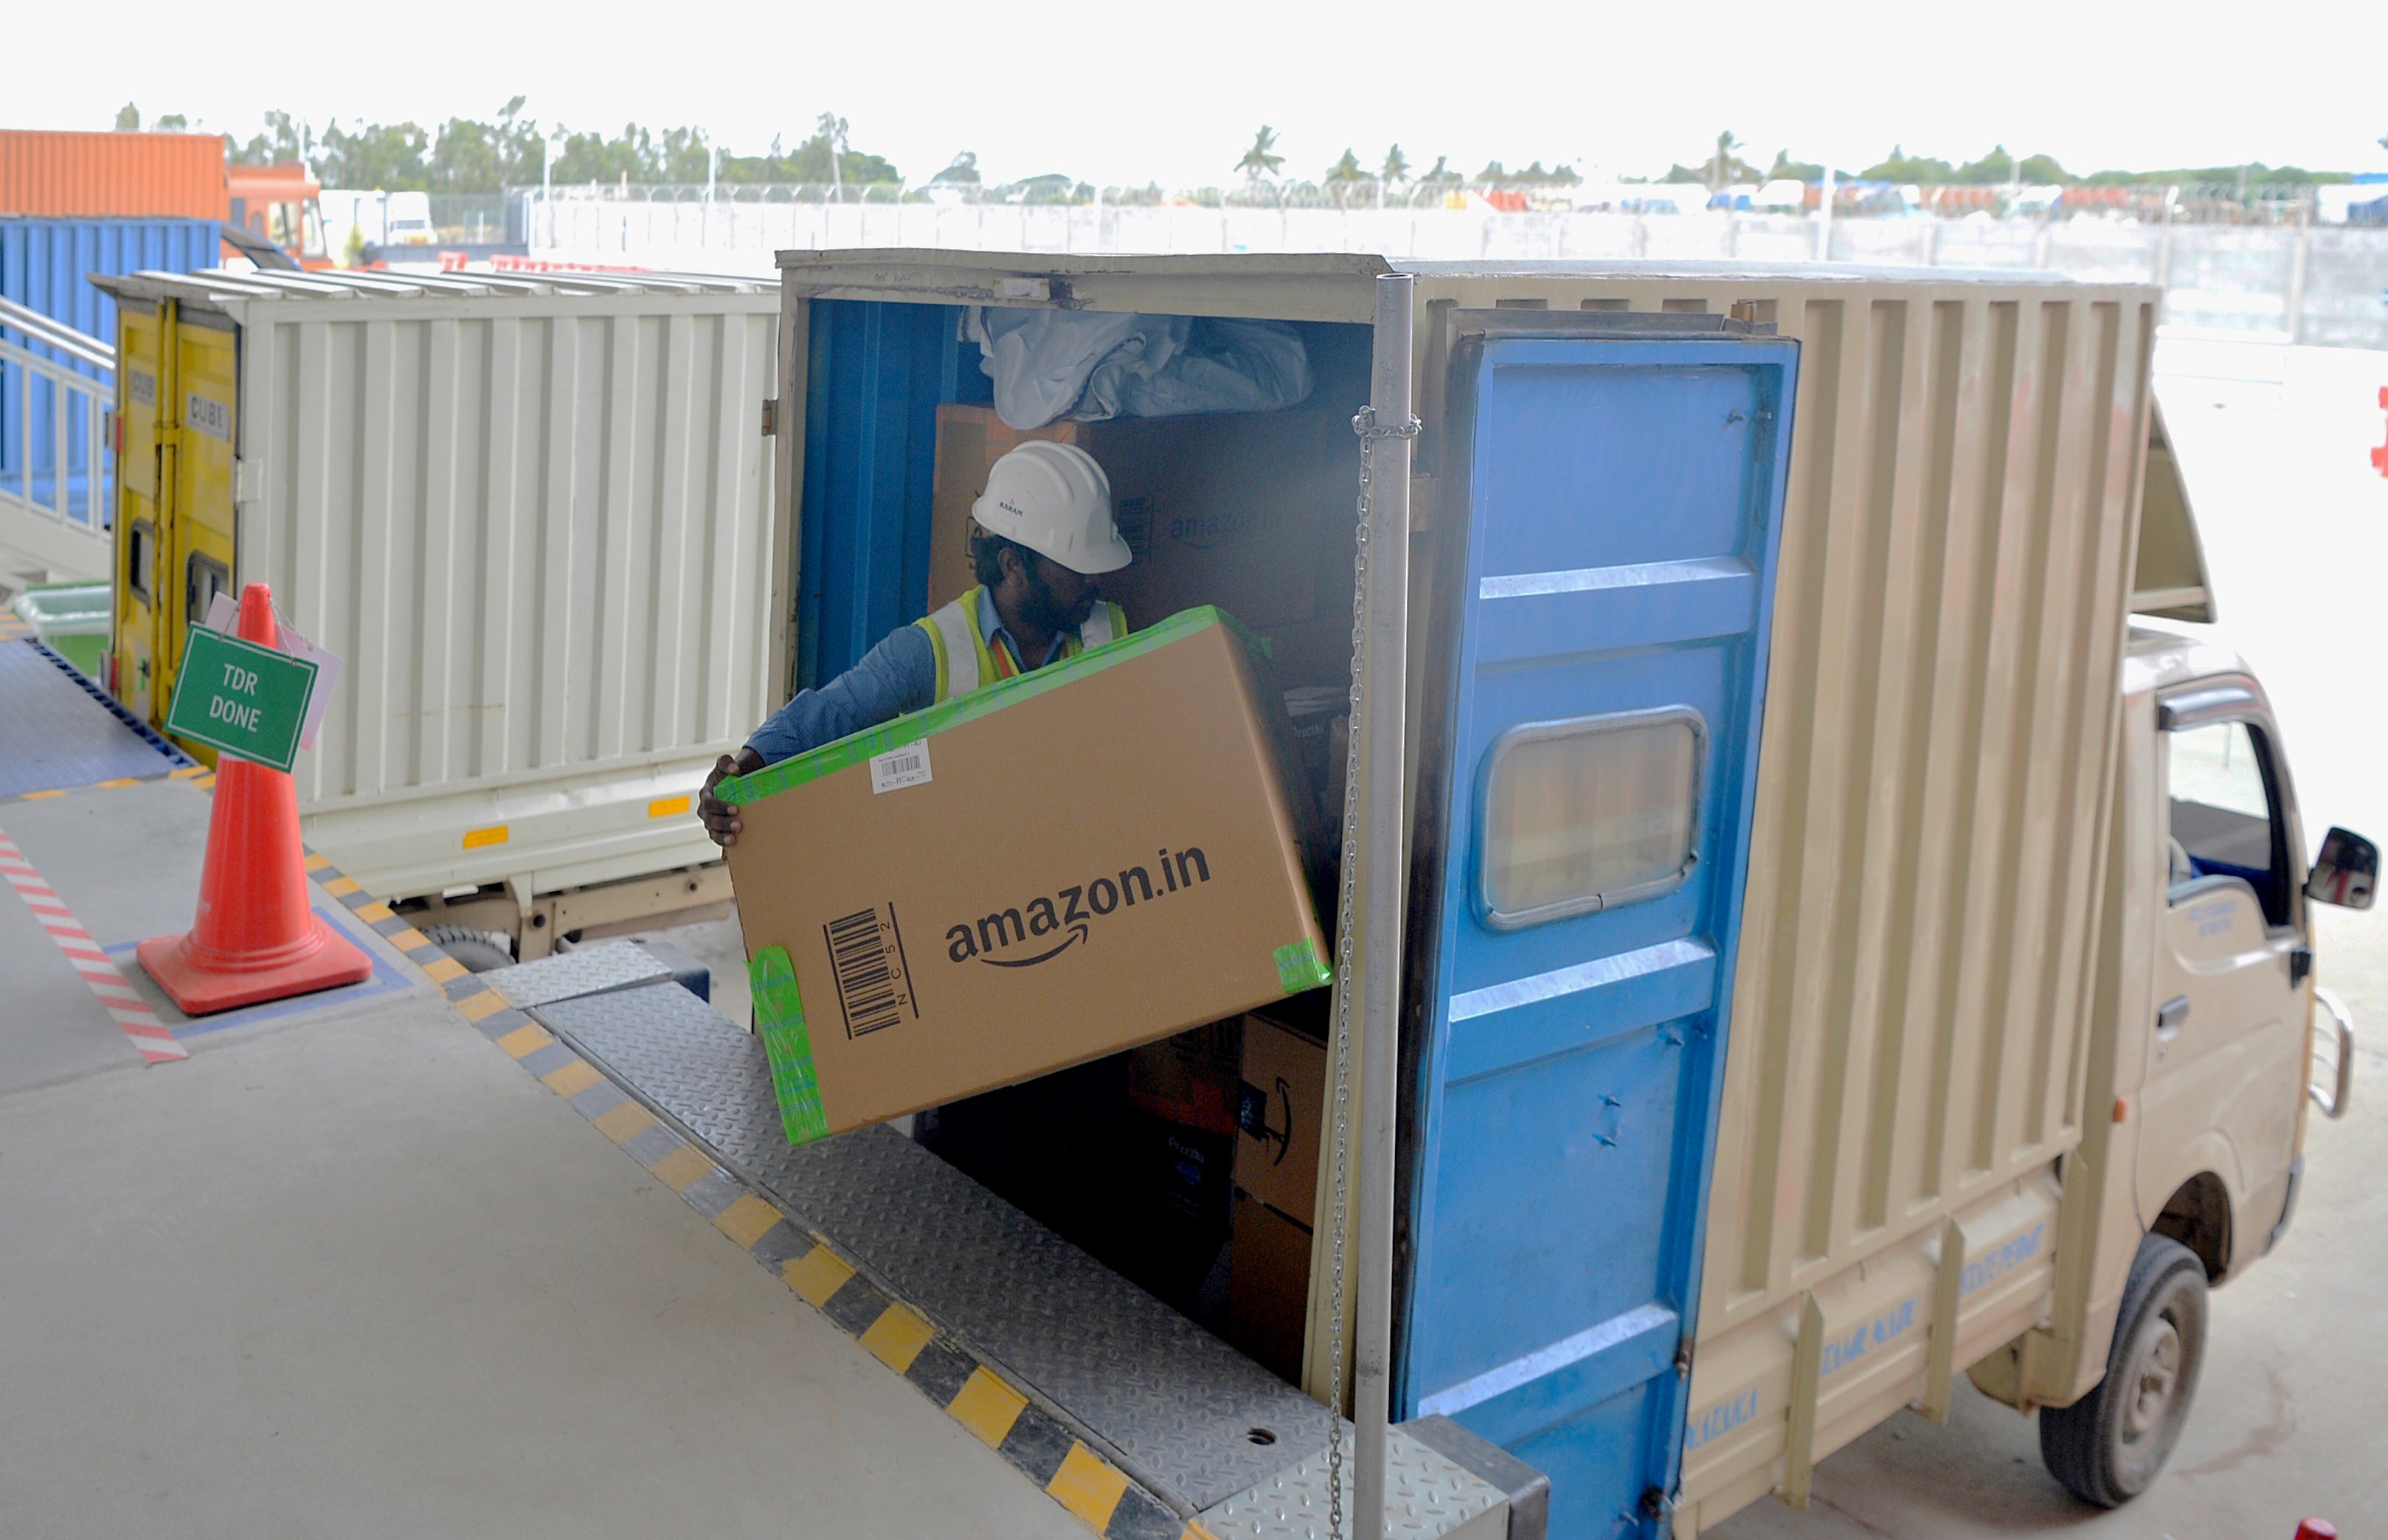 An Amazon India worker loads a van with products for delivery at the company’s warehouse on the outskirts of Bengaluru in 2018